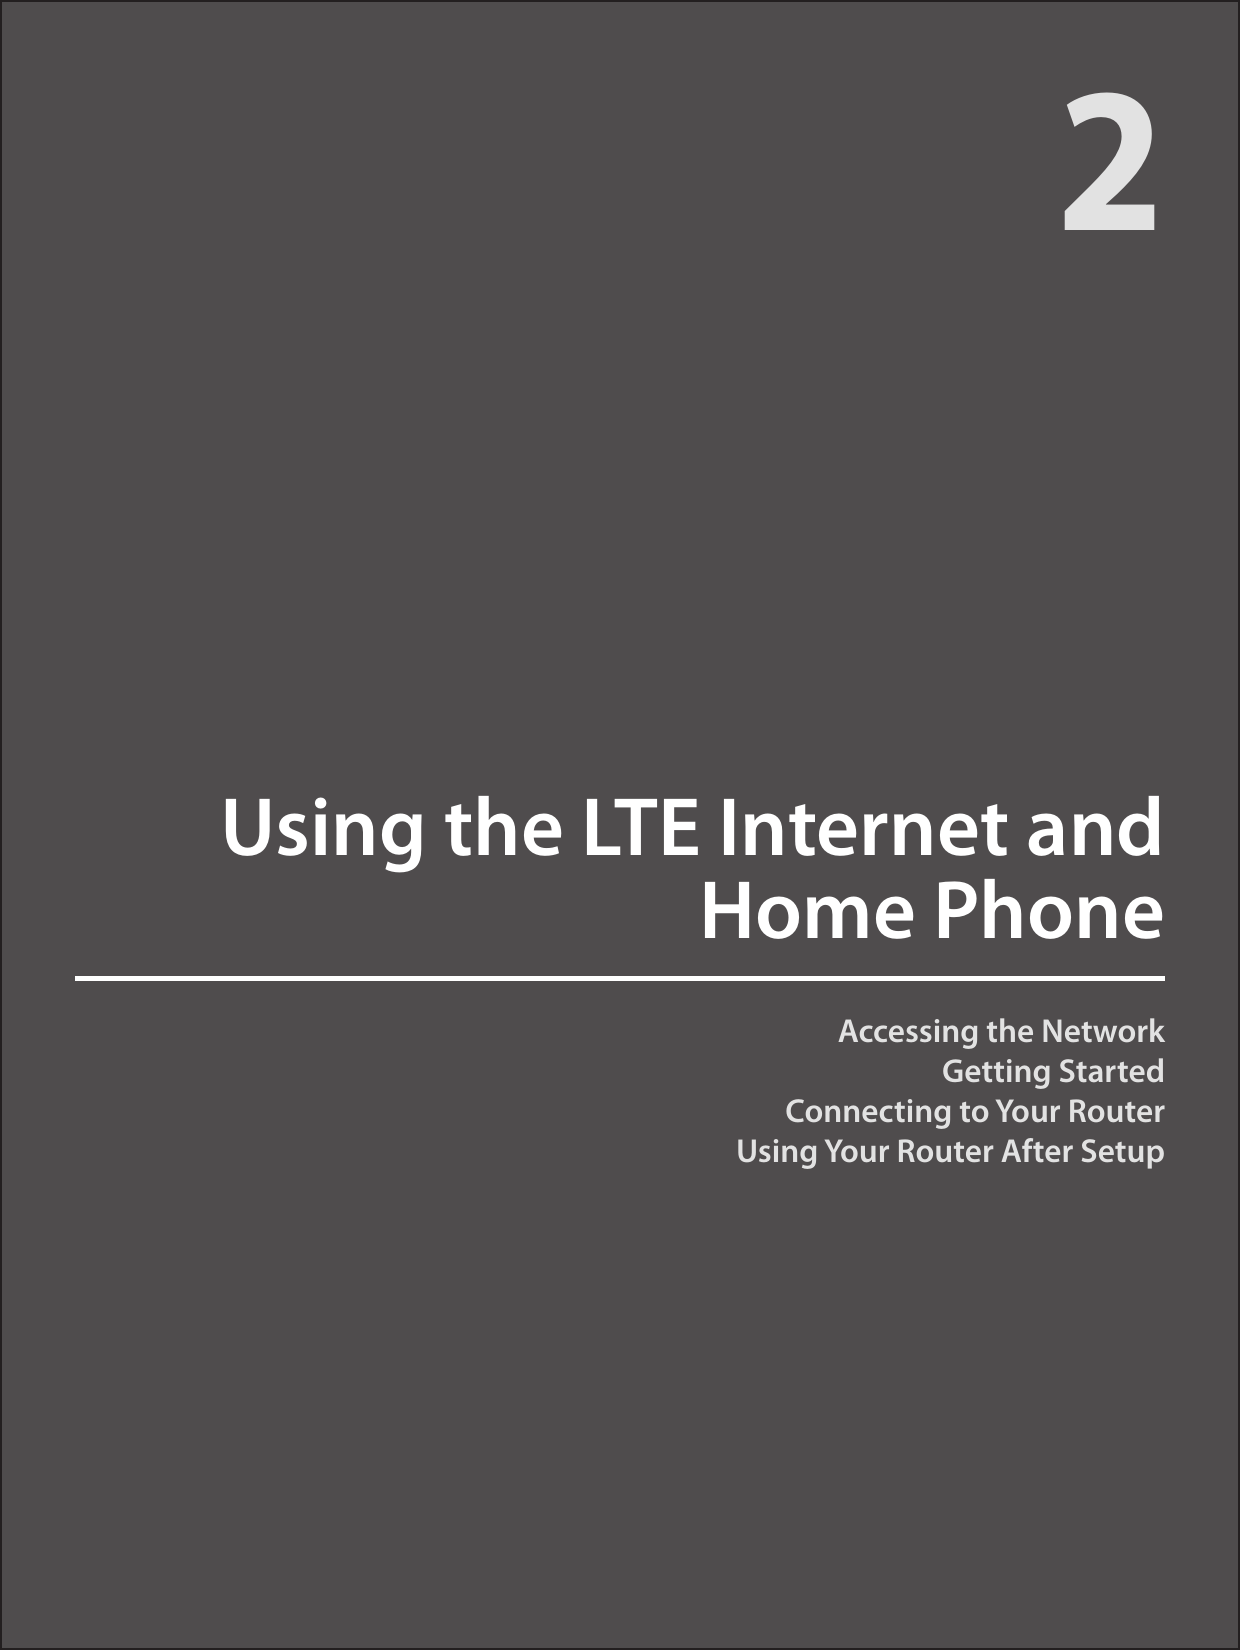 Accessing the NetworkGetting StartedConnecting to Your RouterUsing Your Router After SetupUsing the LTE Internet and Home Phone2